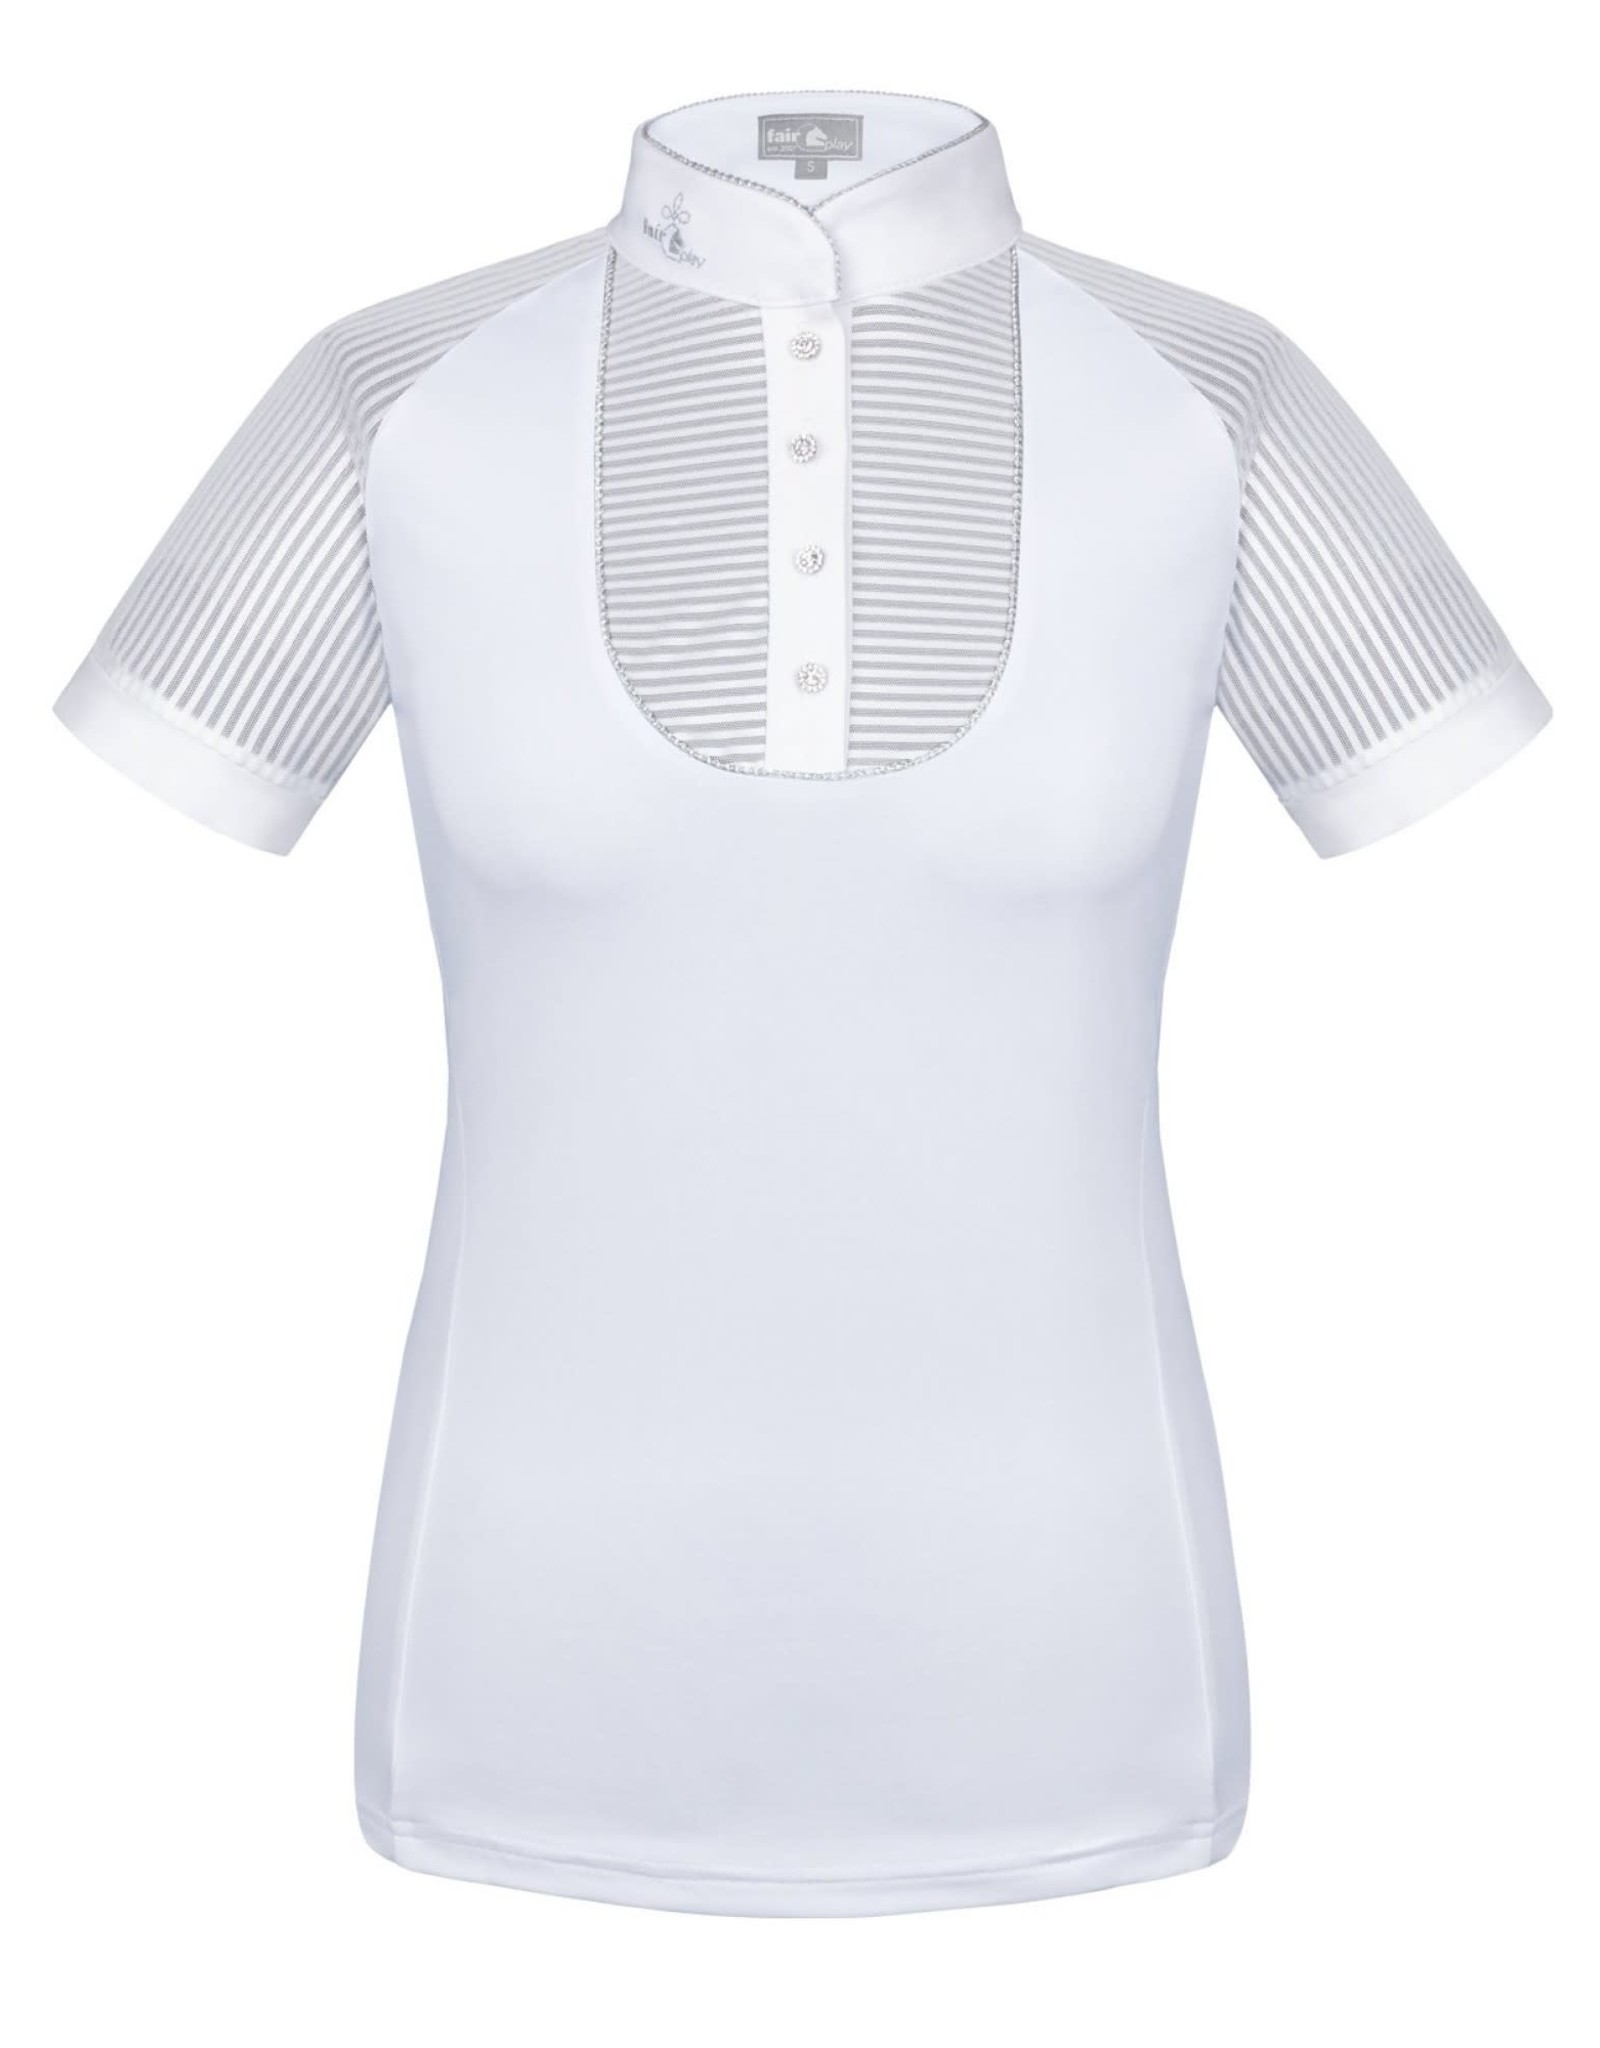 FAIRPLAY JUSTINE COMPETITION SHORT SLEEVE SHOW SHIRT